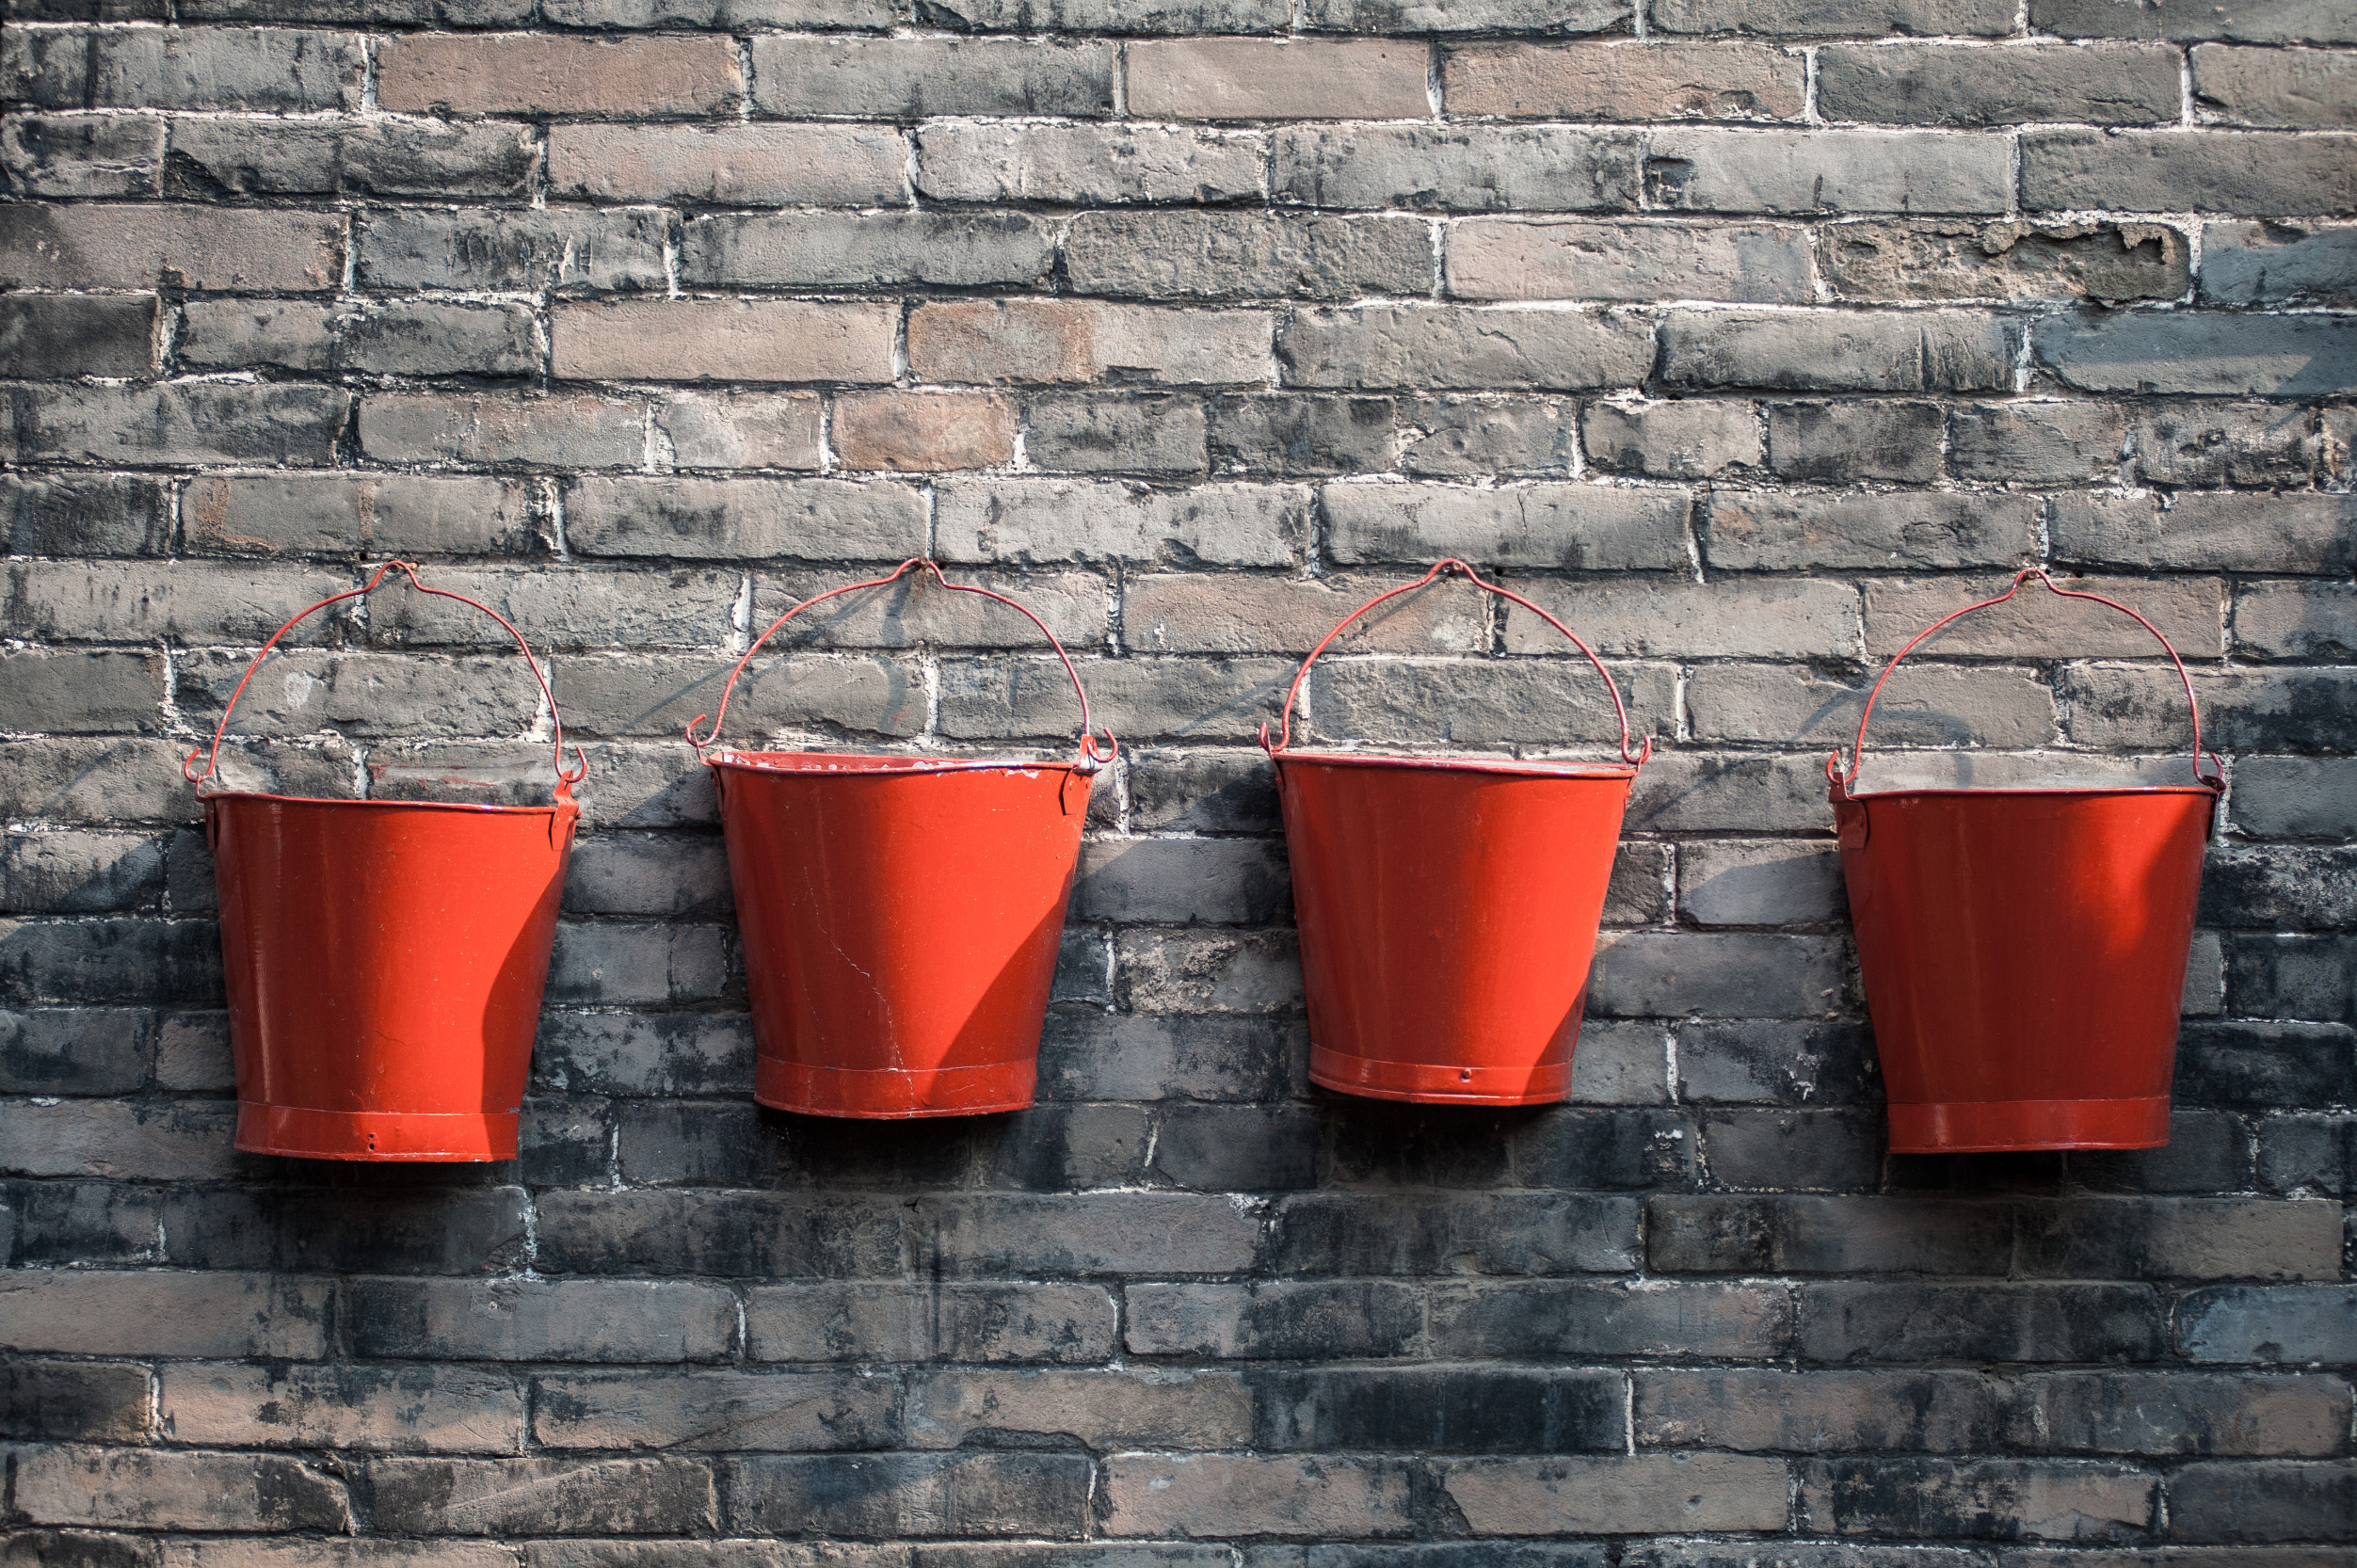 four orange red buckets on a brick wall time management bucket method productivity tips Those Someday Goals